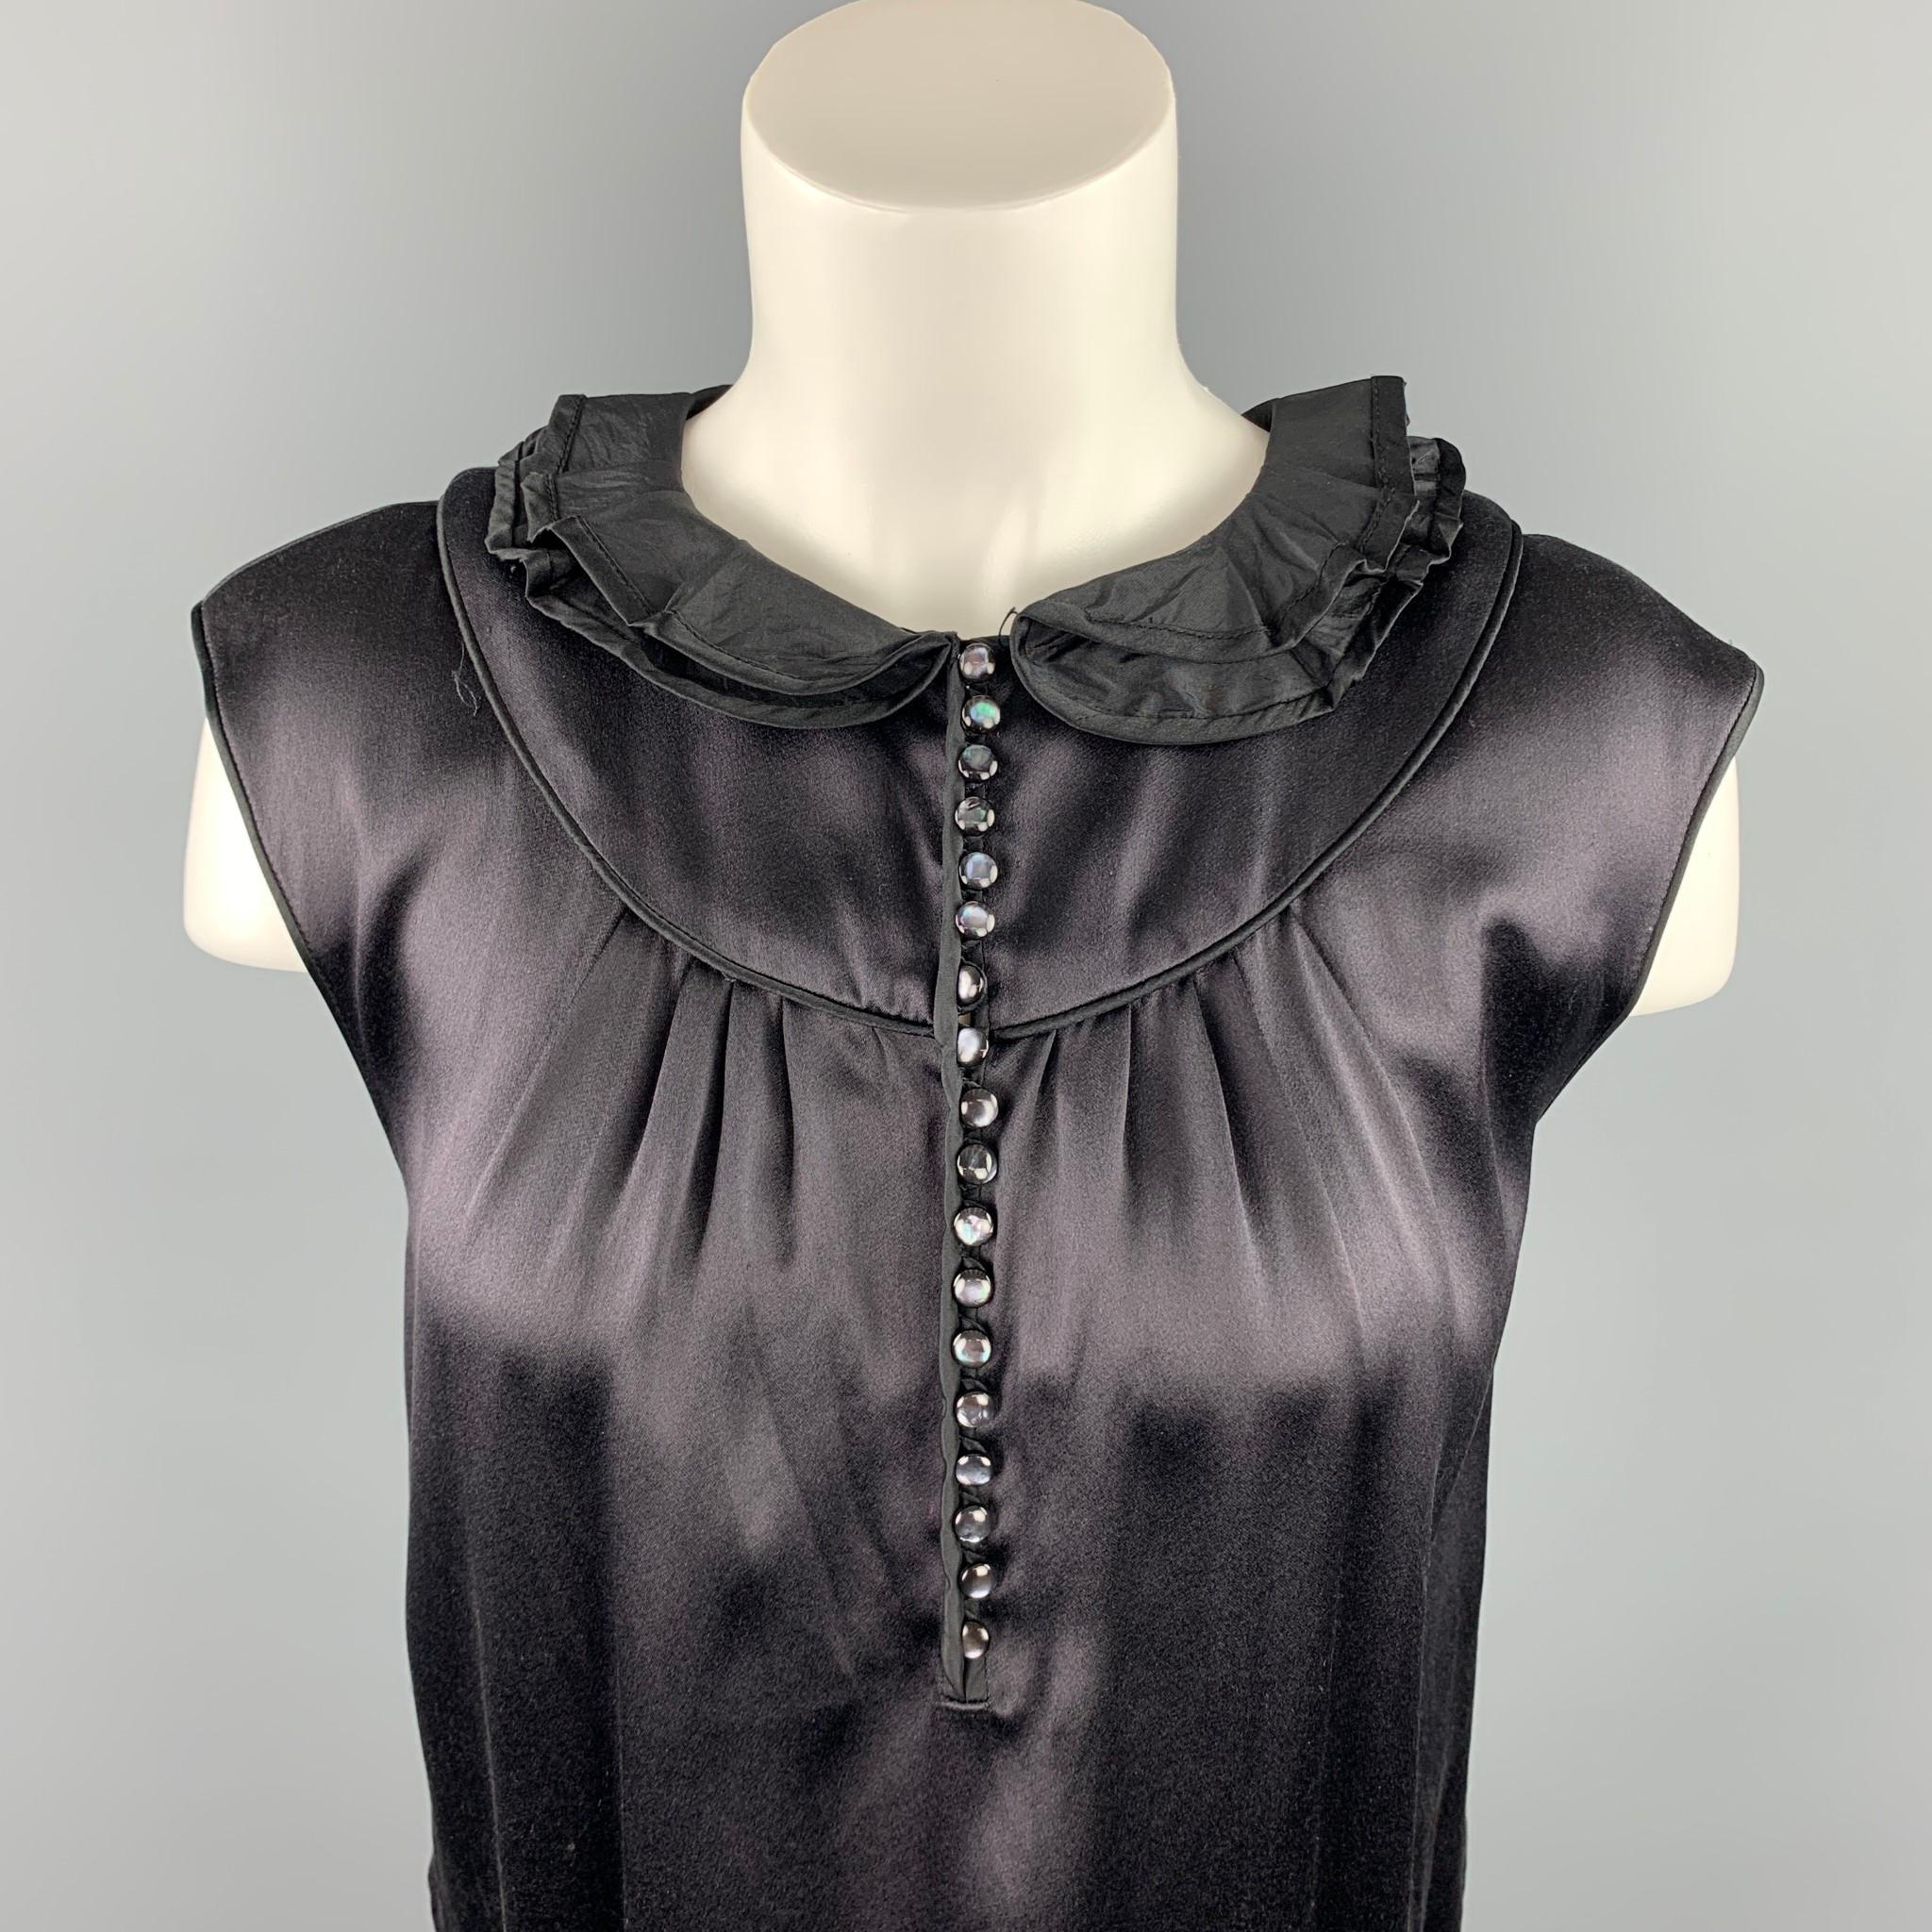 MARC JACOBS sleeveless dress top comes in a black satin silk featuring a ruffled collar and a buttoned closure. Made in USA.

Brand New.
Marked: 6
Original Retail Price: $925.00

Measurements:

Shoulder: 17 in.
Bust: 36 in.
Length: 22.5 in. 